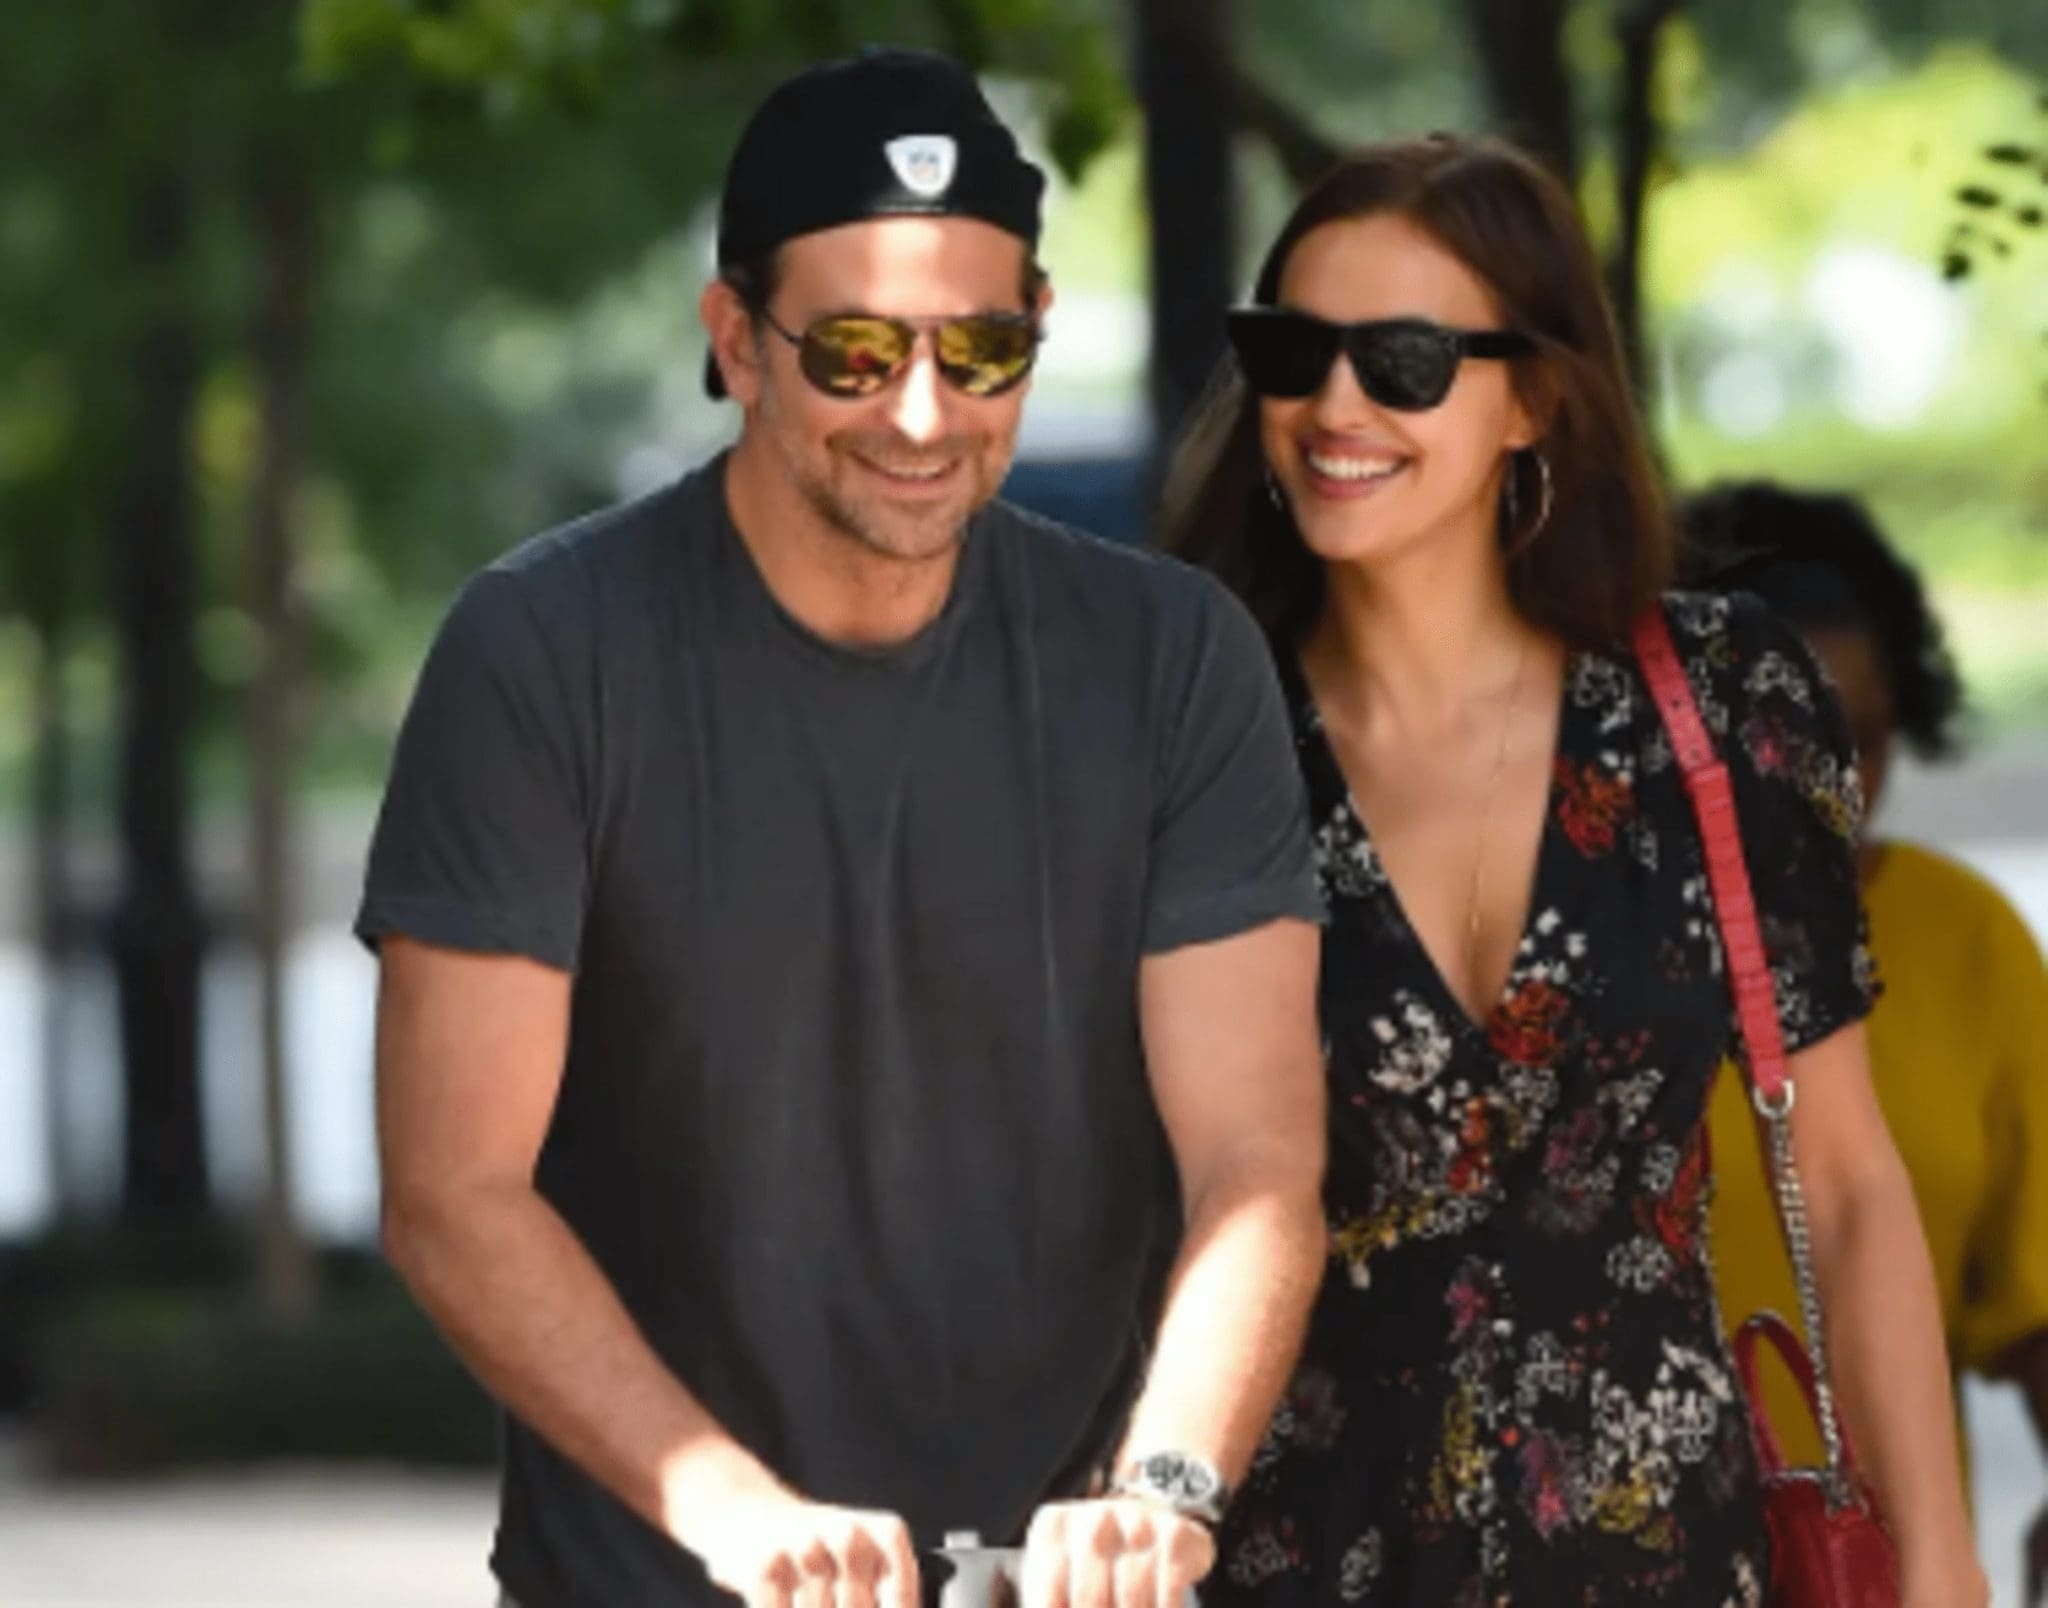 Irina Shayk and Bradley Cooper are considering expanding their family and reigniting their love